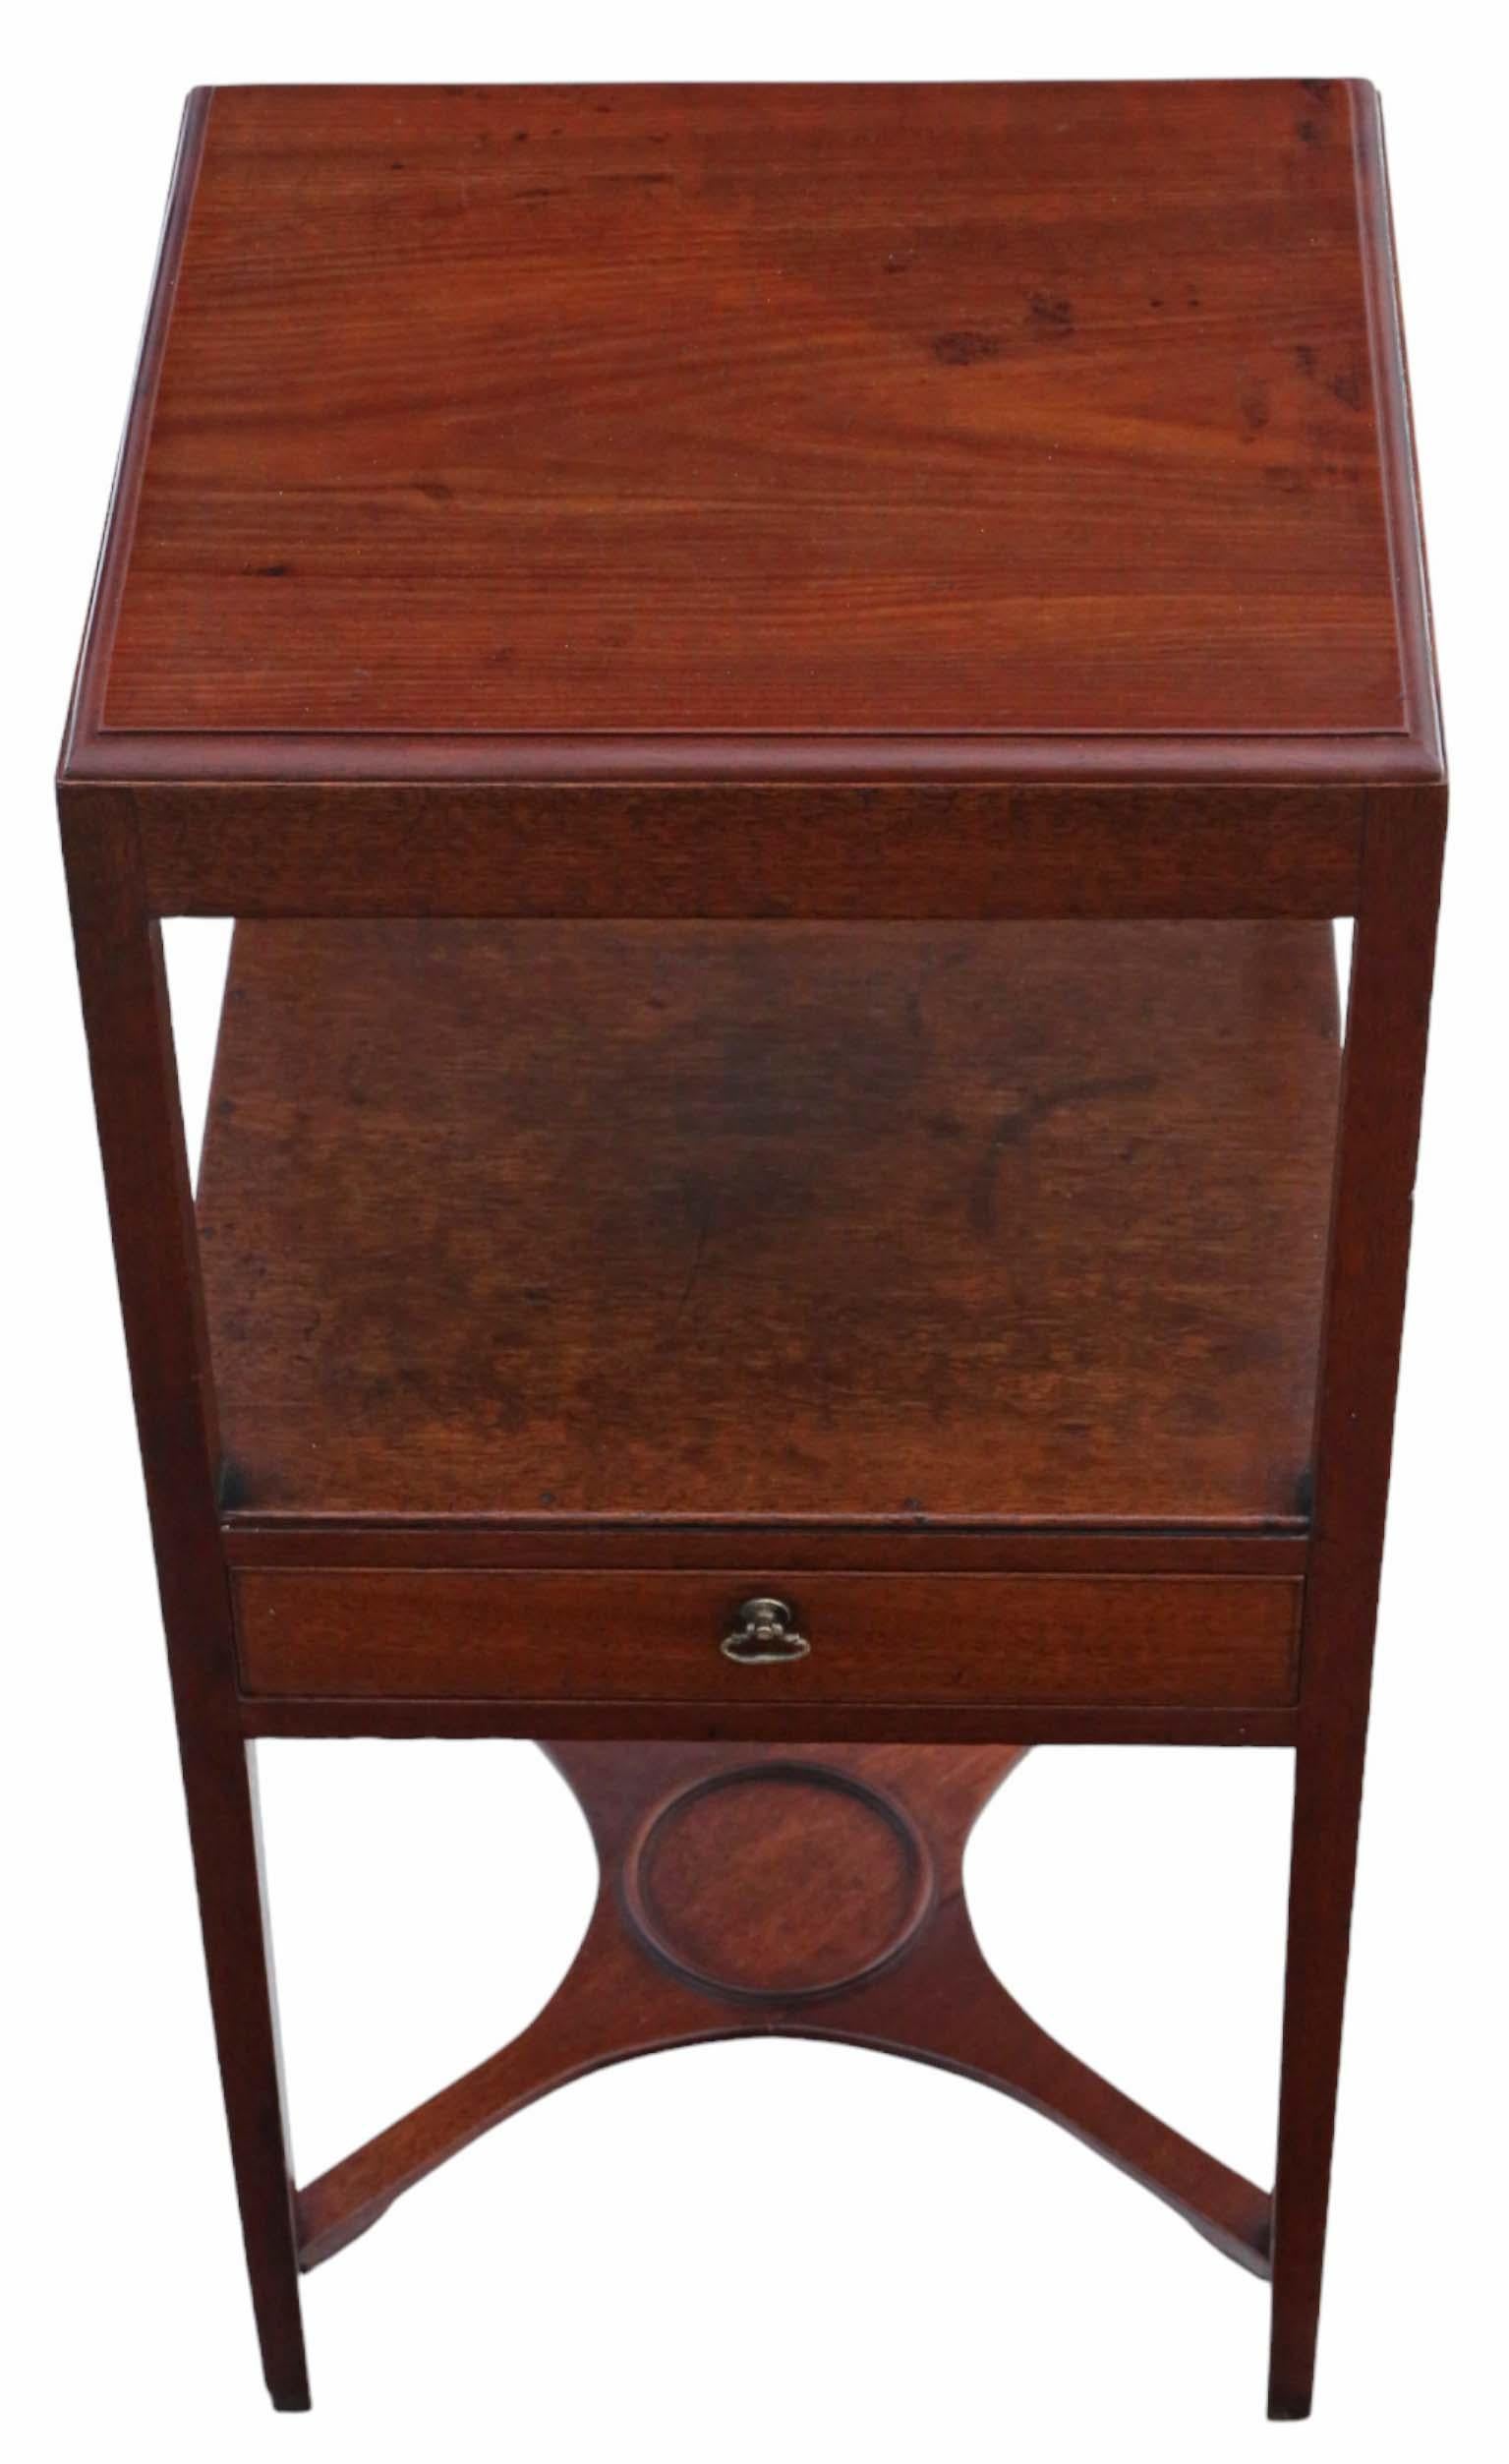 Antique mahogany washstand, bedside table, or Georgian nightstand dating back to circa 1800.

A rare and remarkable piece, it remains solid with no loose joints, and there is no evidence of woodworm. The drawer smoothly slides open.

The item boasts